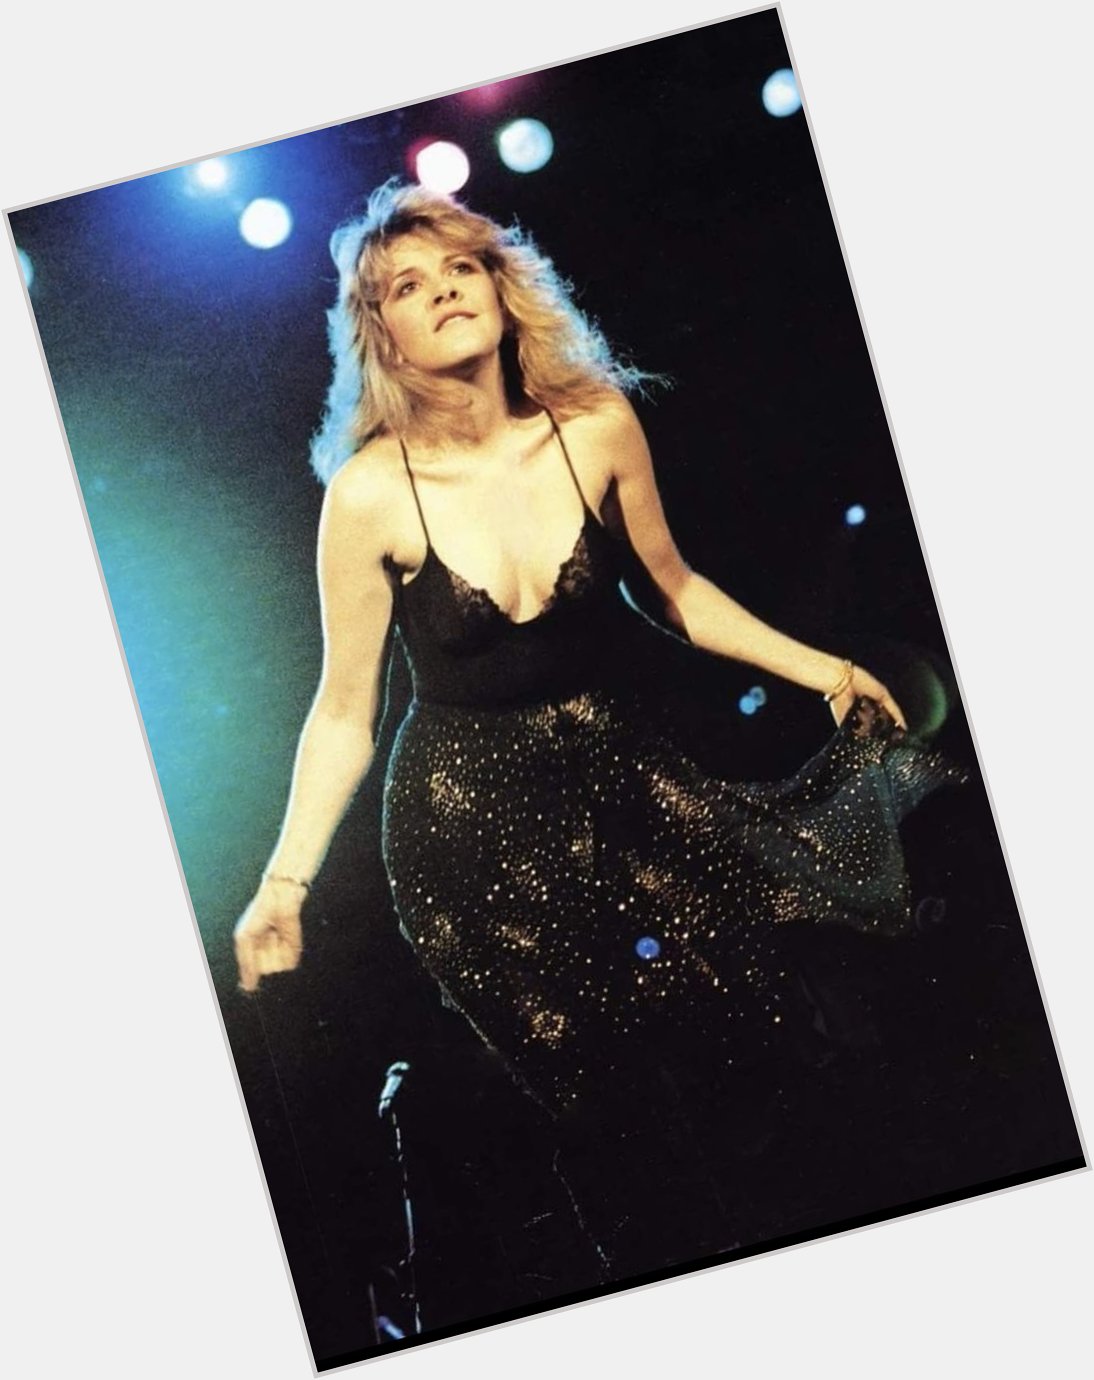 Happy birthday to the personification of etheral, stevie nicks 